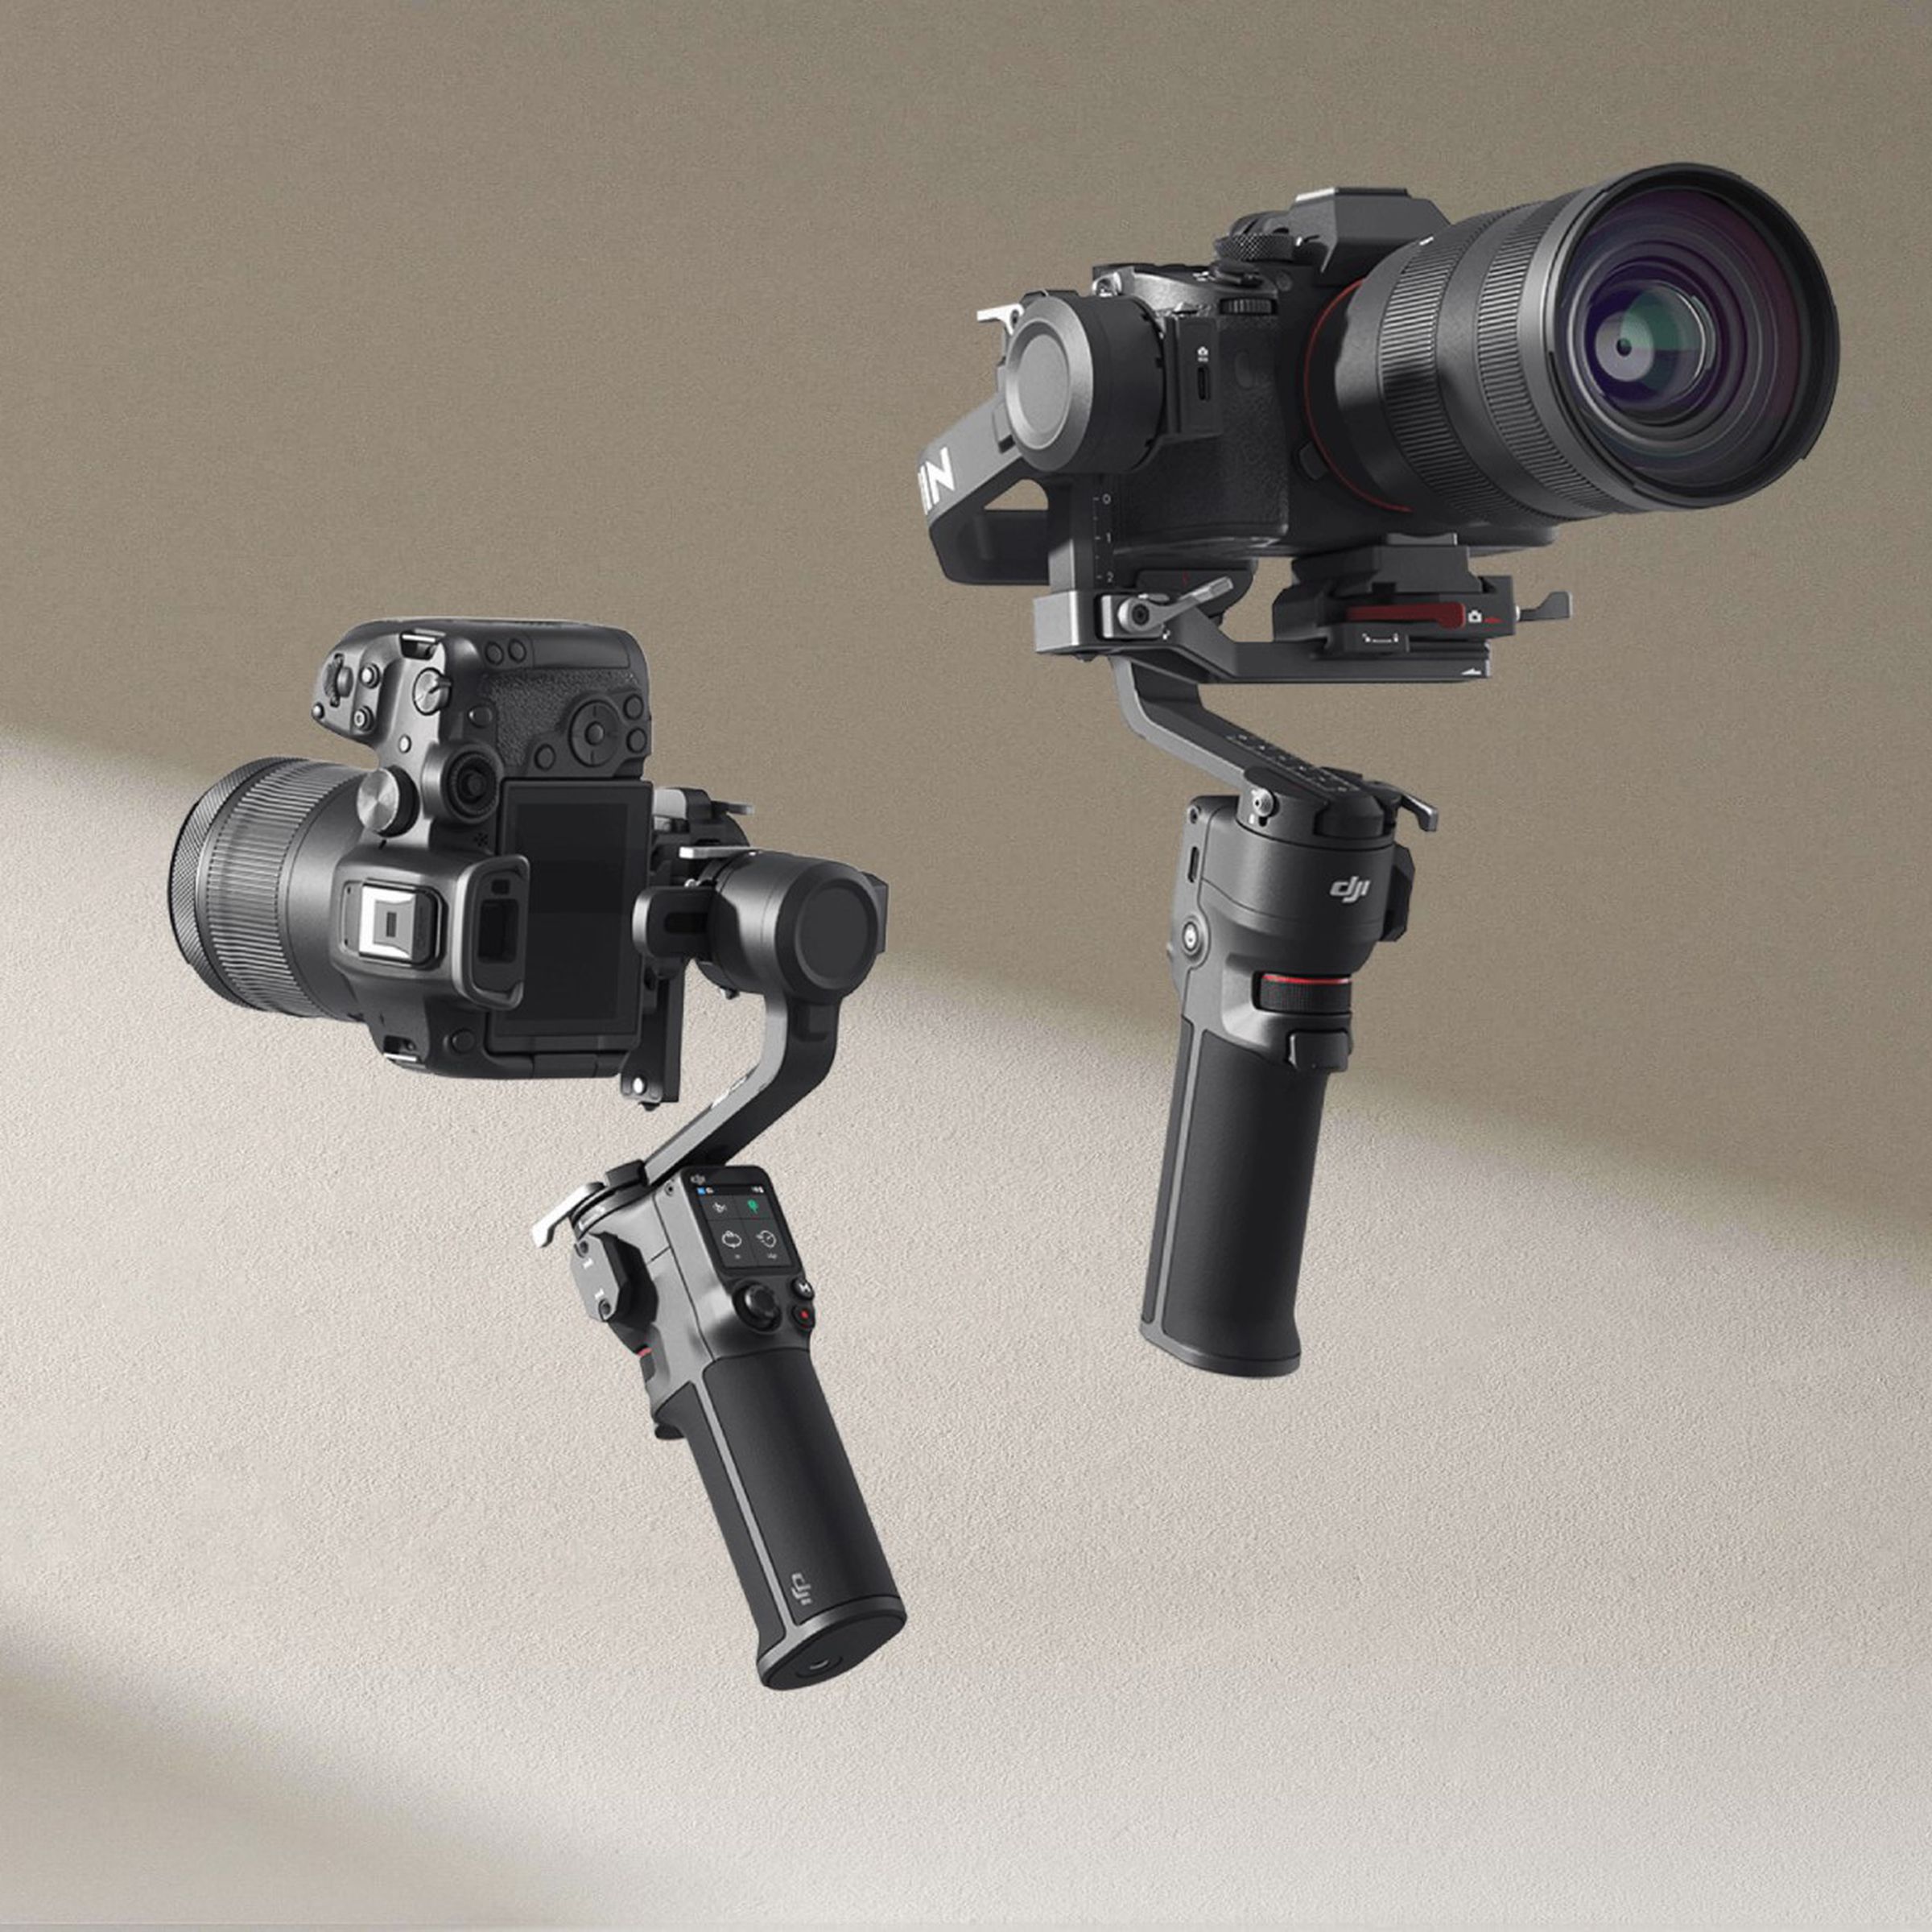 Two models of the DJI RS 3 Mini equipped with DSLR cameras against a beige backdrop.